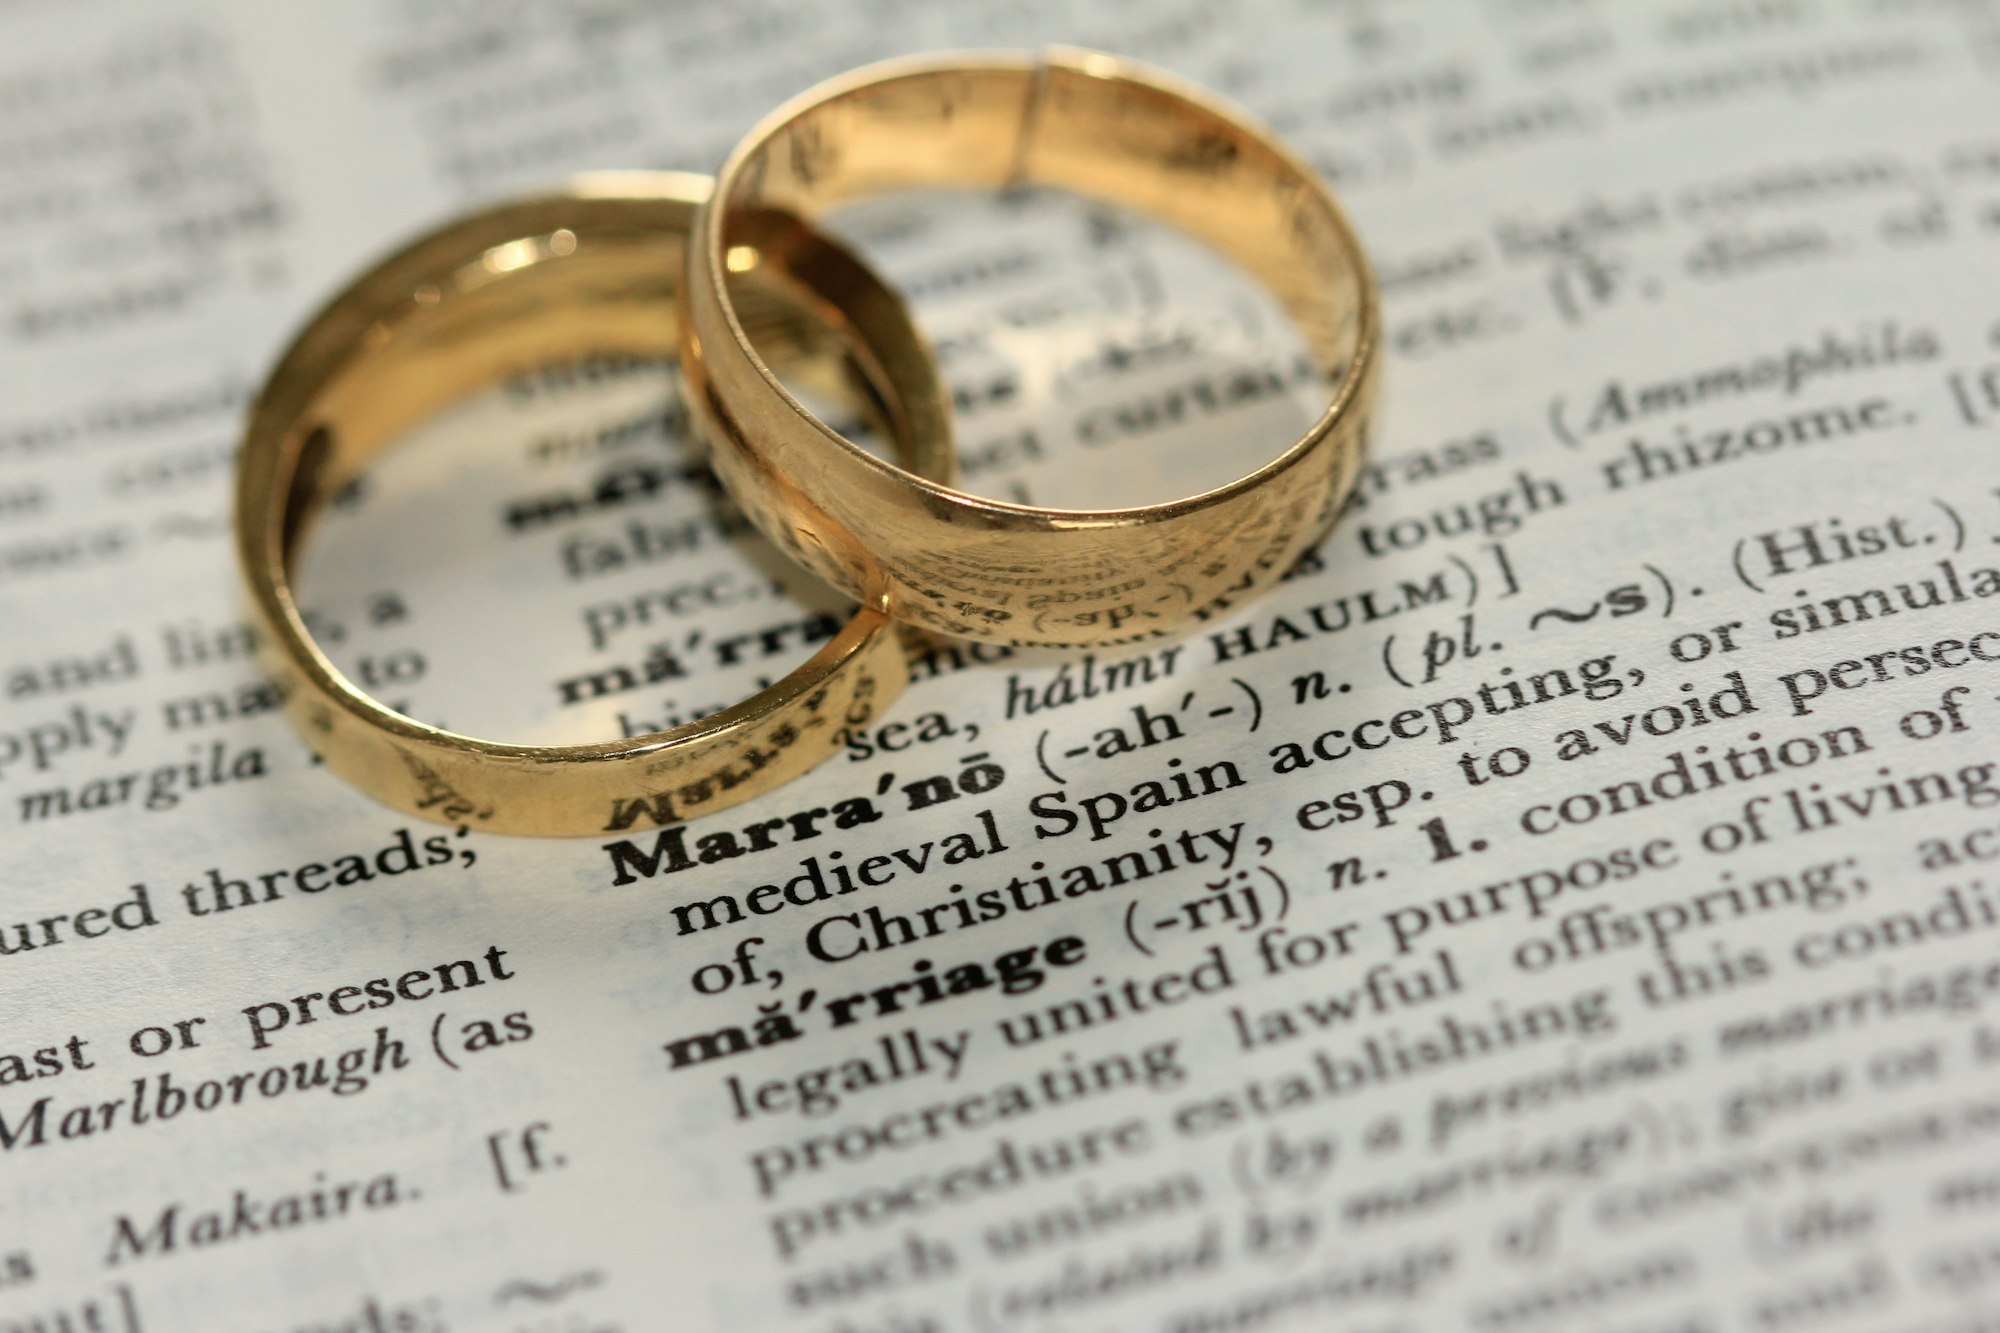 Registration of Foreigners Marriage- The Special Marriage Act, 1954